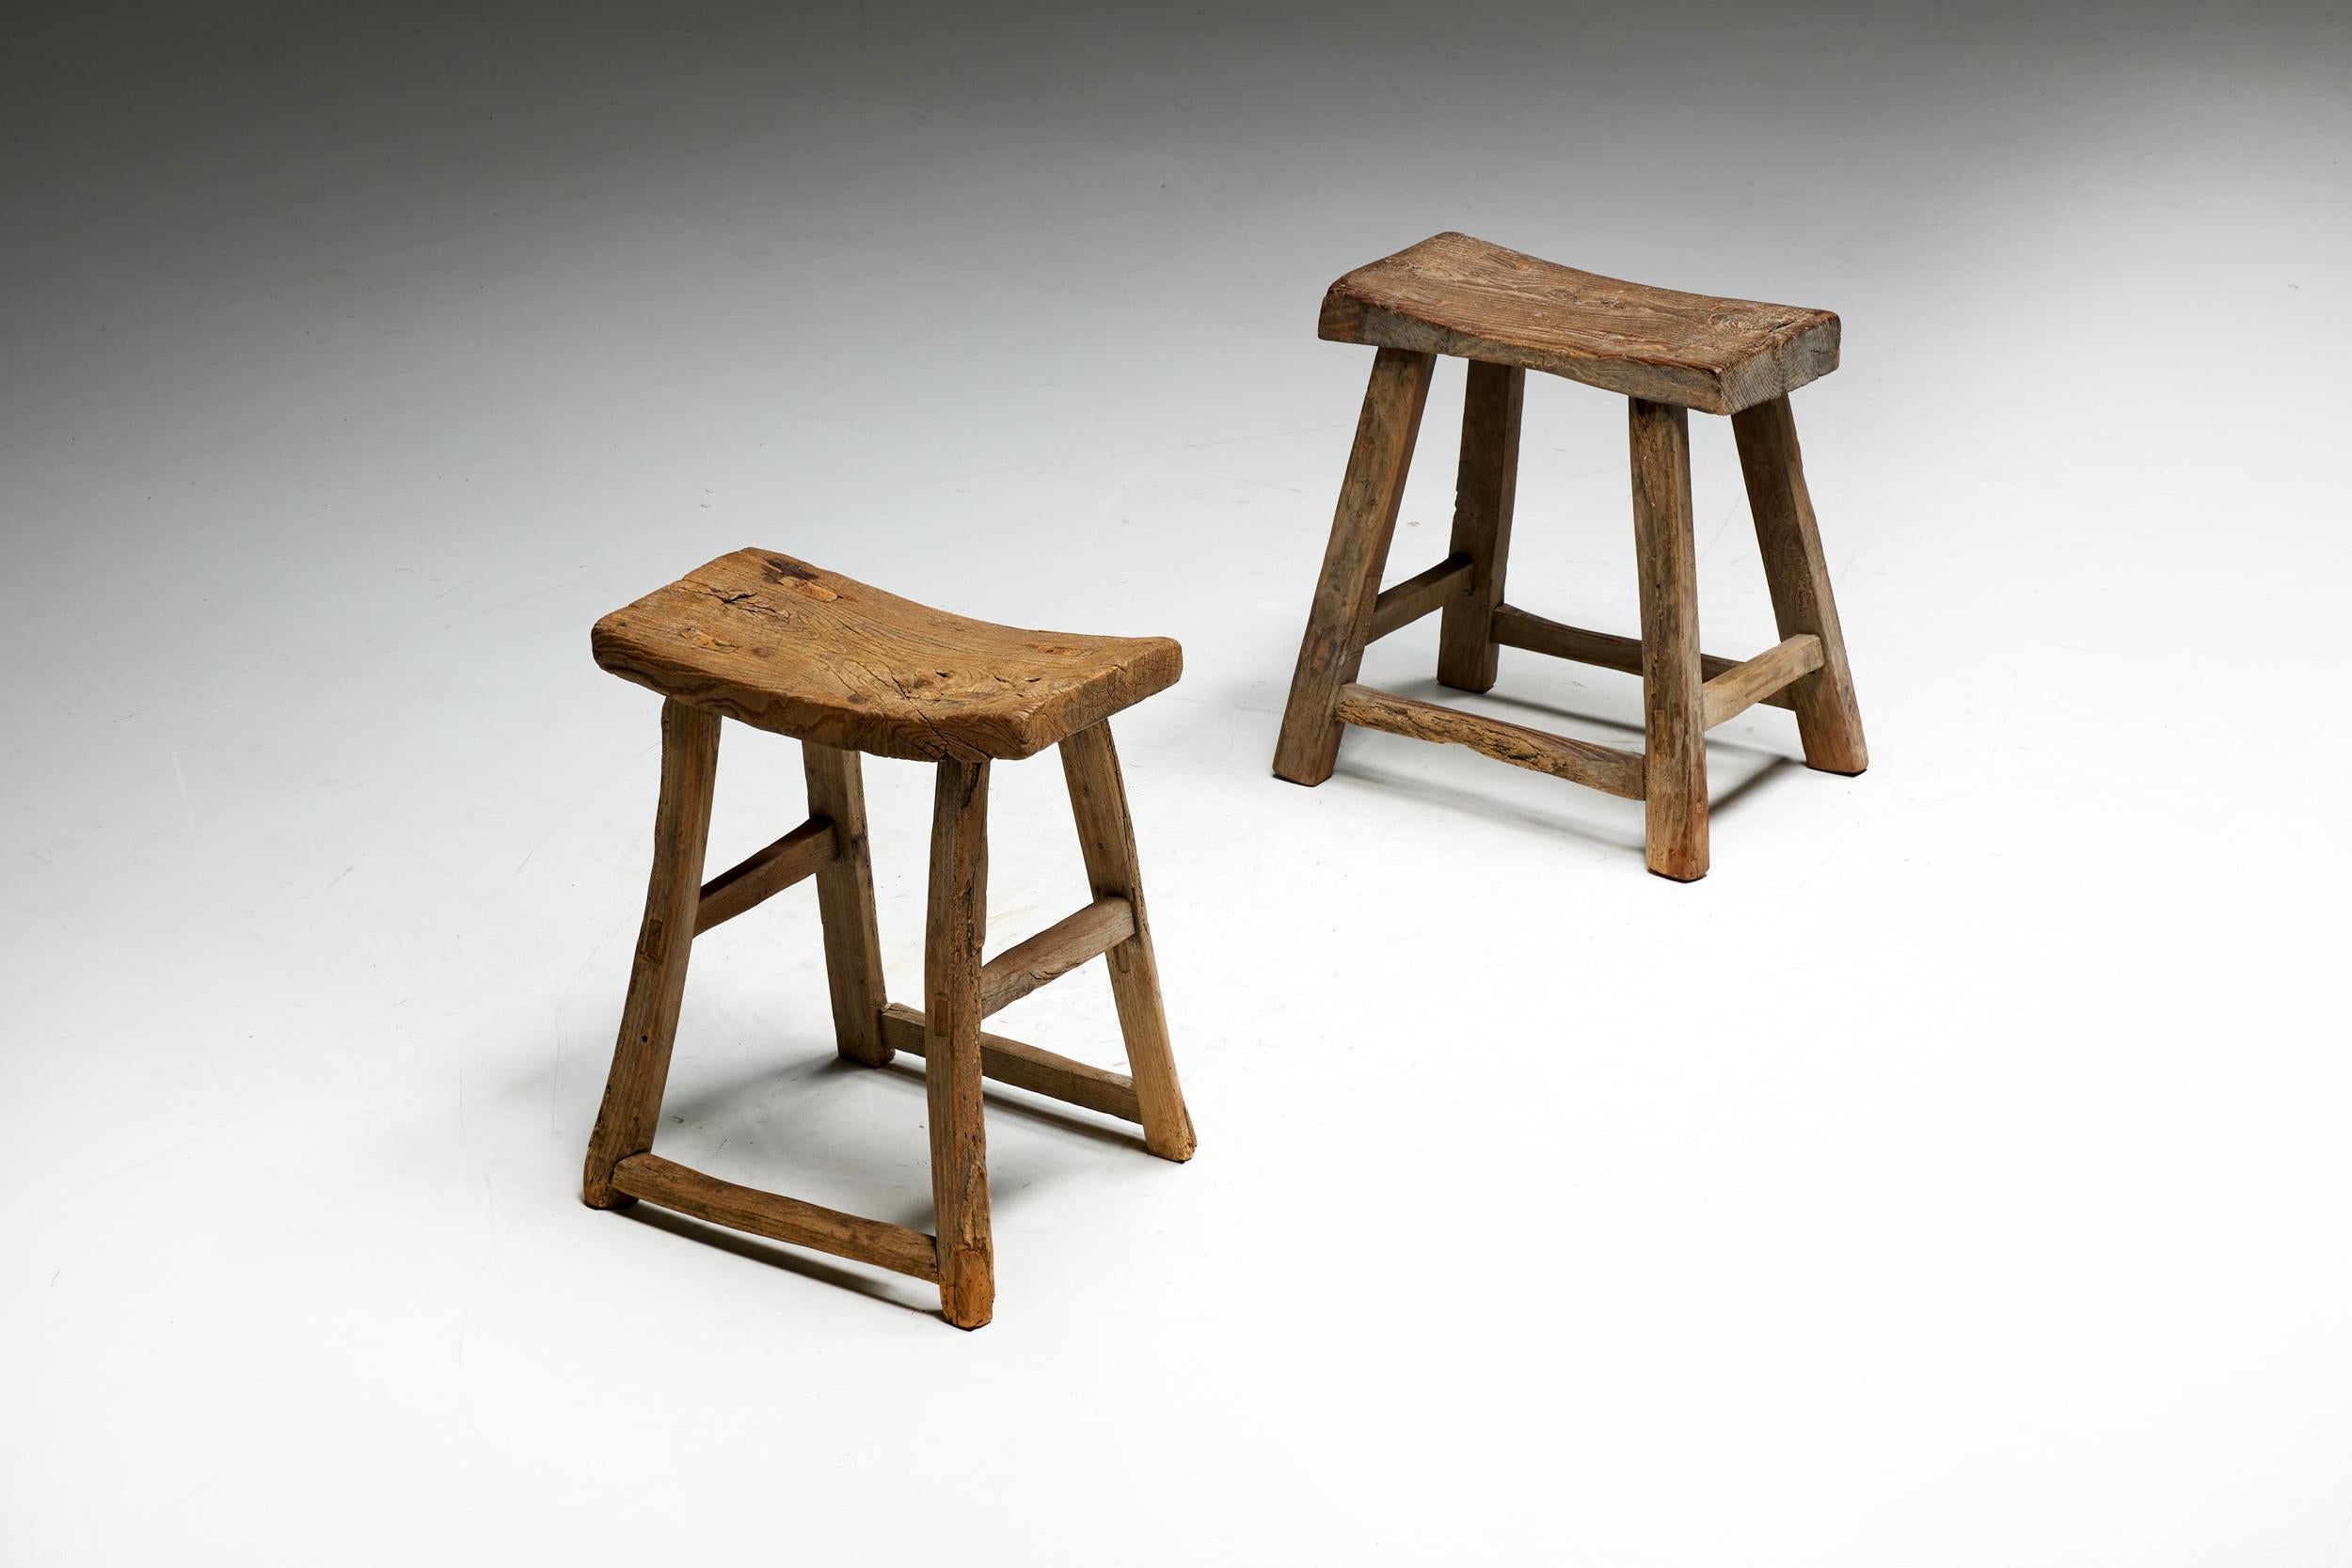 Rustic Travail Populaire Stool, France, Early 20th Century For Sale 6